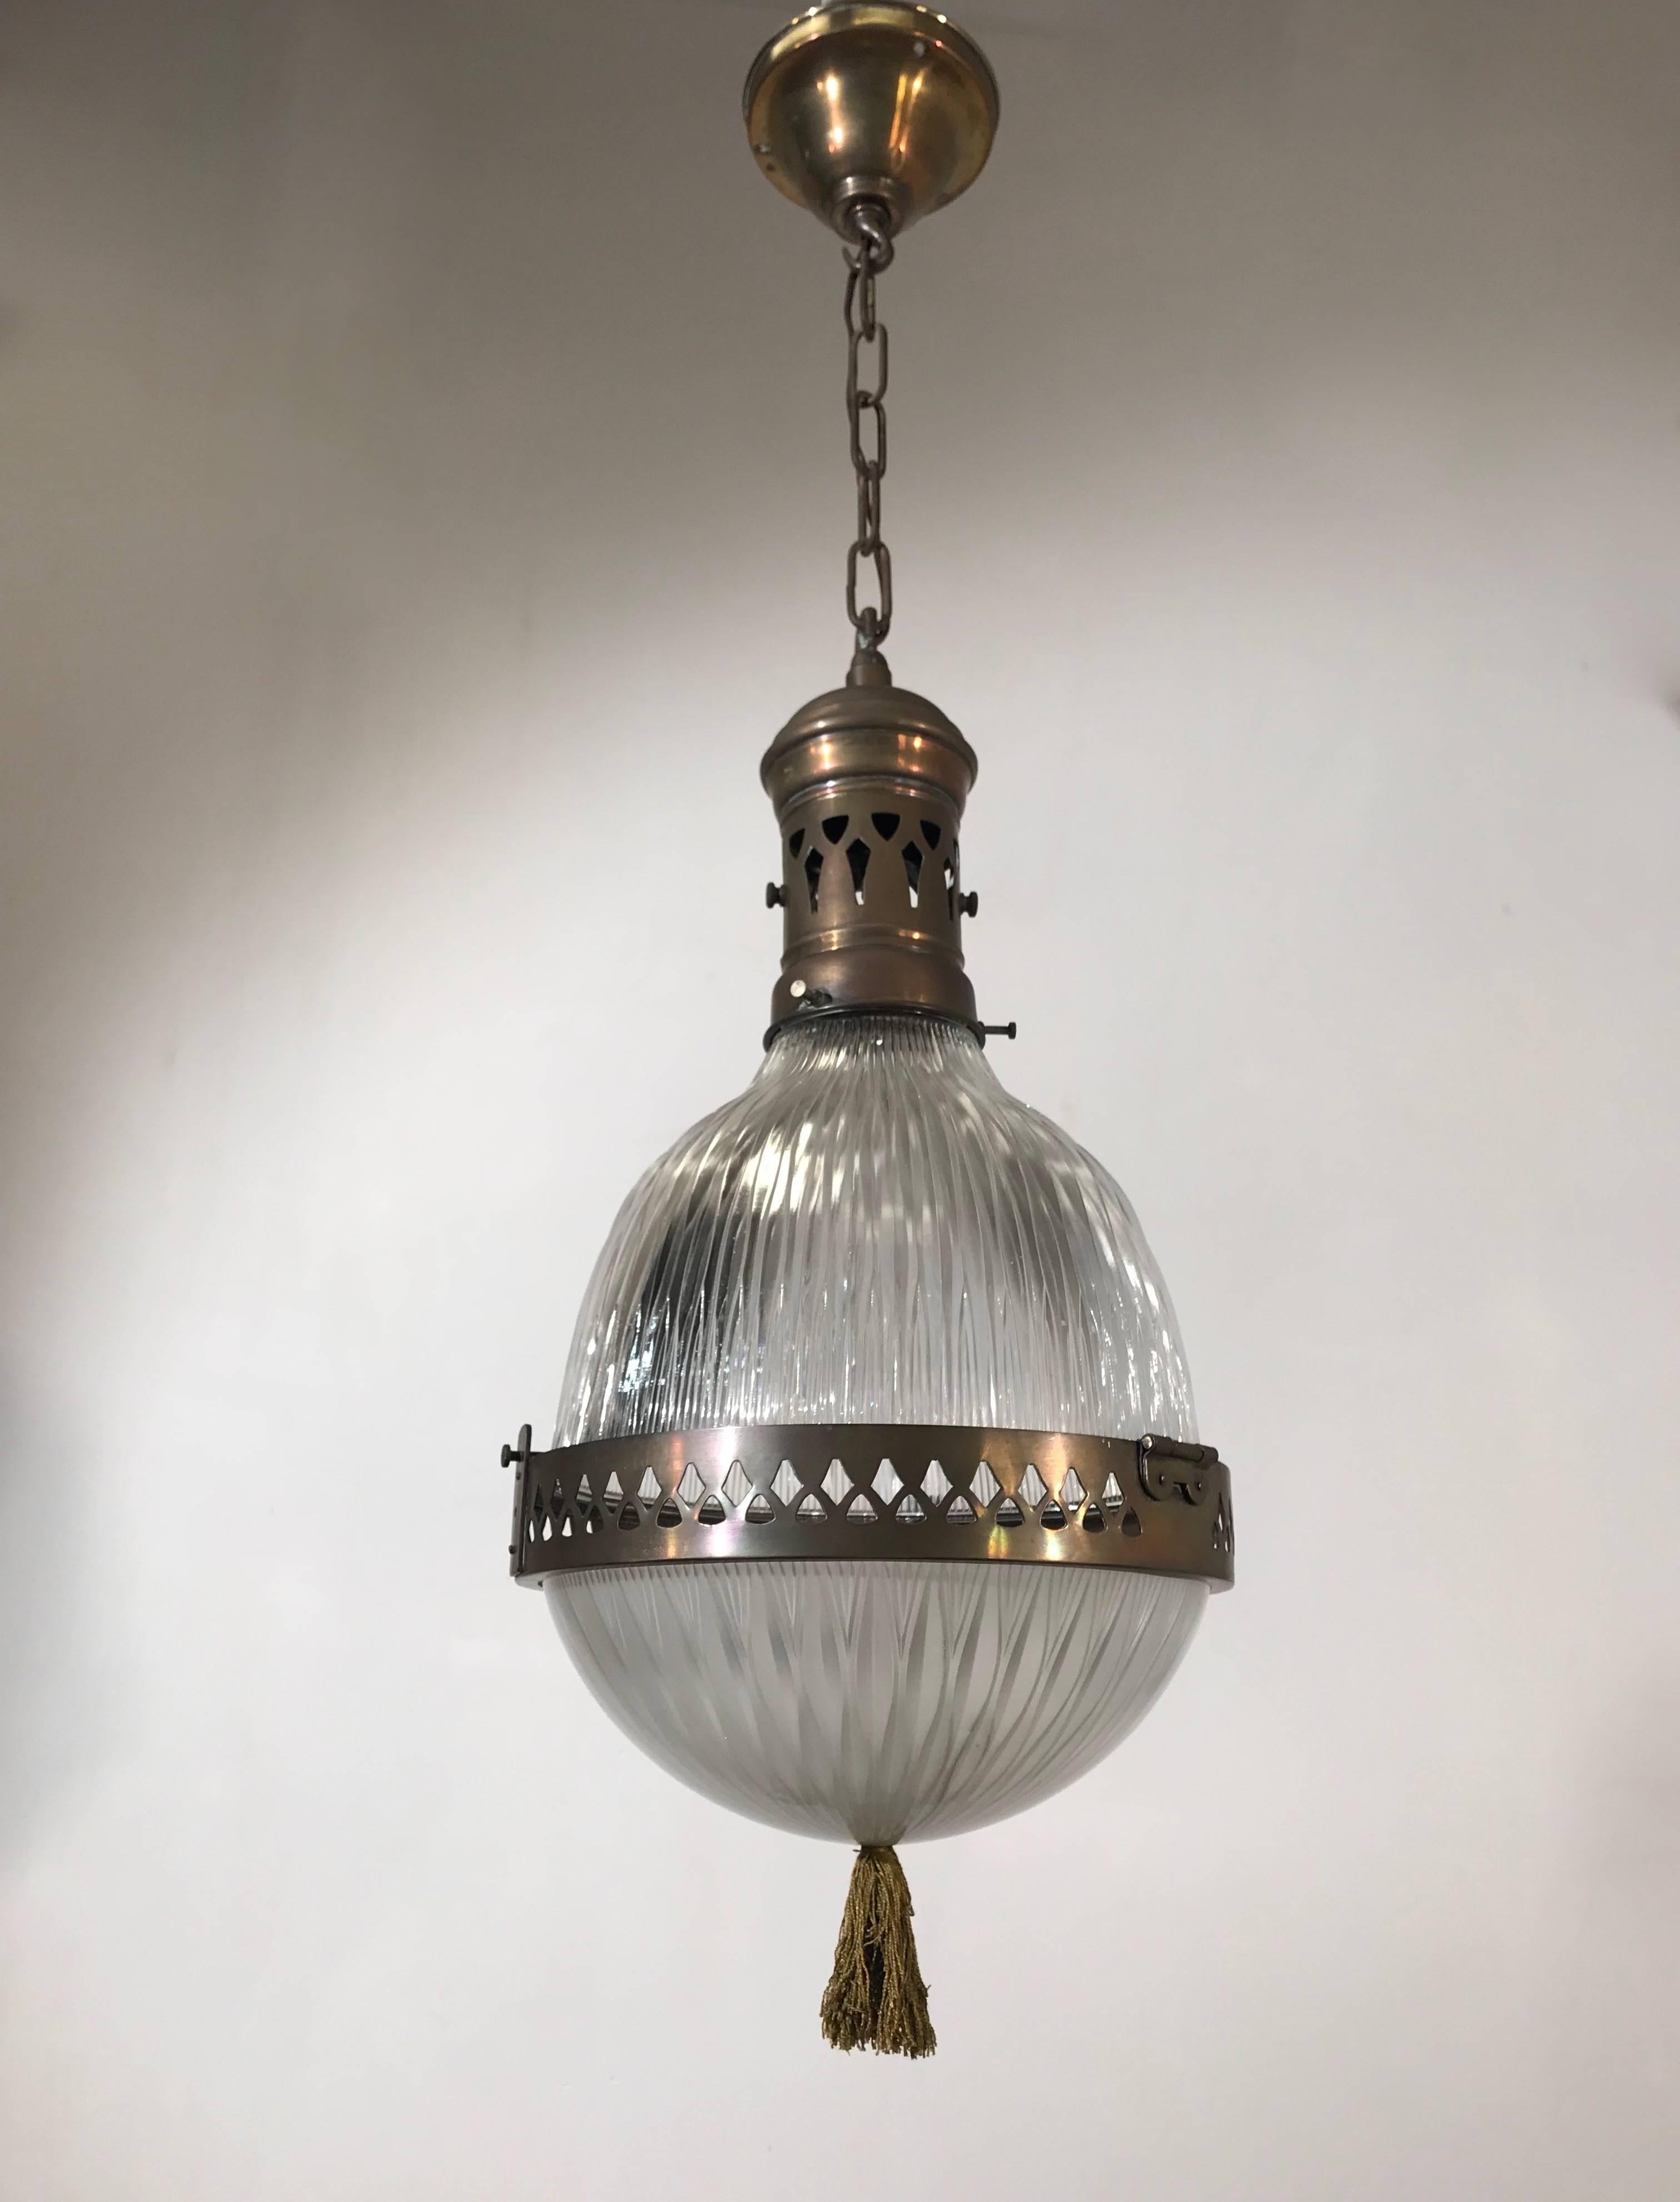 Practical size and striking Art Deco pendant, circa 1920. 

If you are looking for the ideal pendant to light up your entrance, landing or bedroom then look no further. This fine Art Deco ceiling lamp with stunning glass shades is marked Asteroid